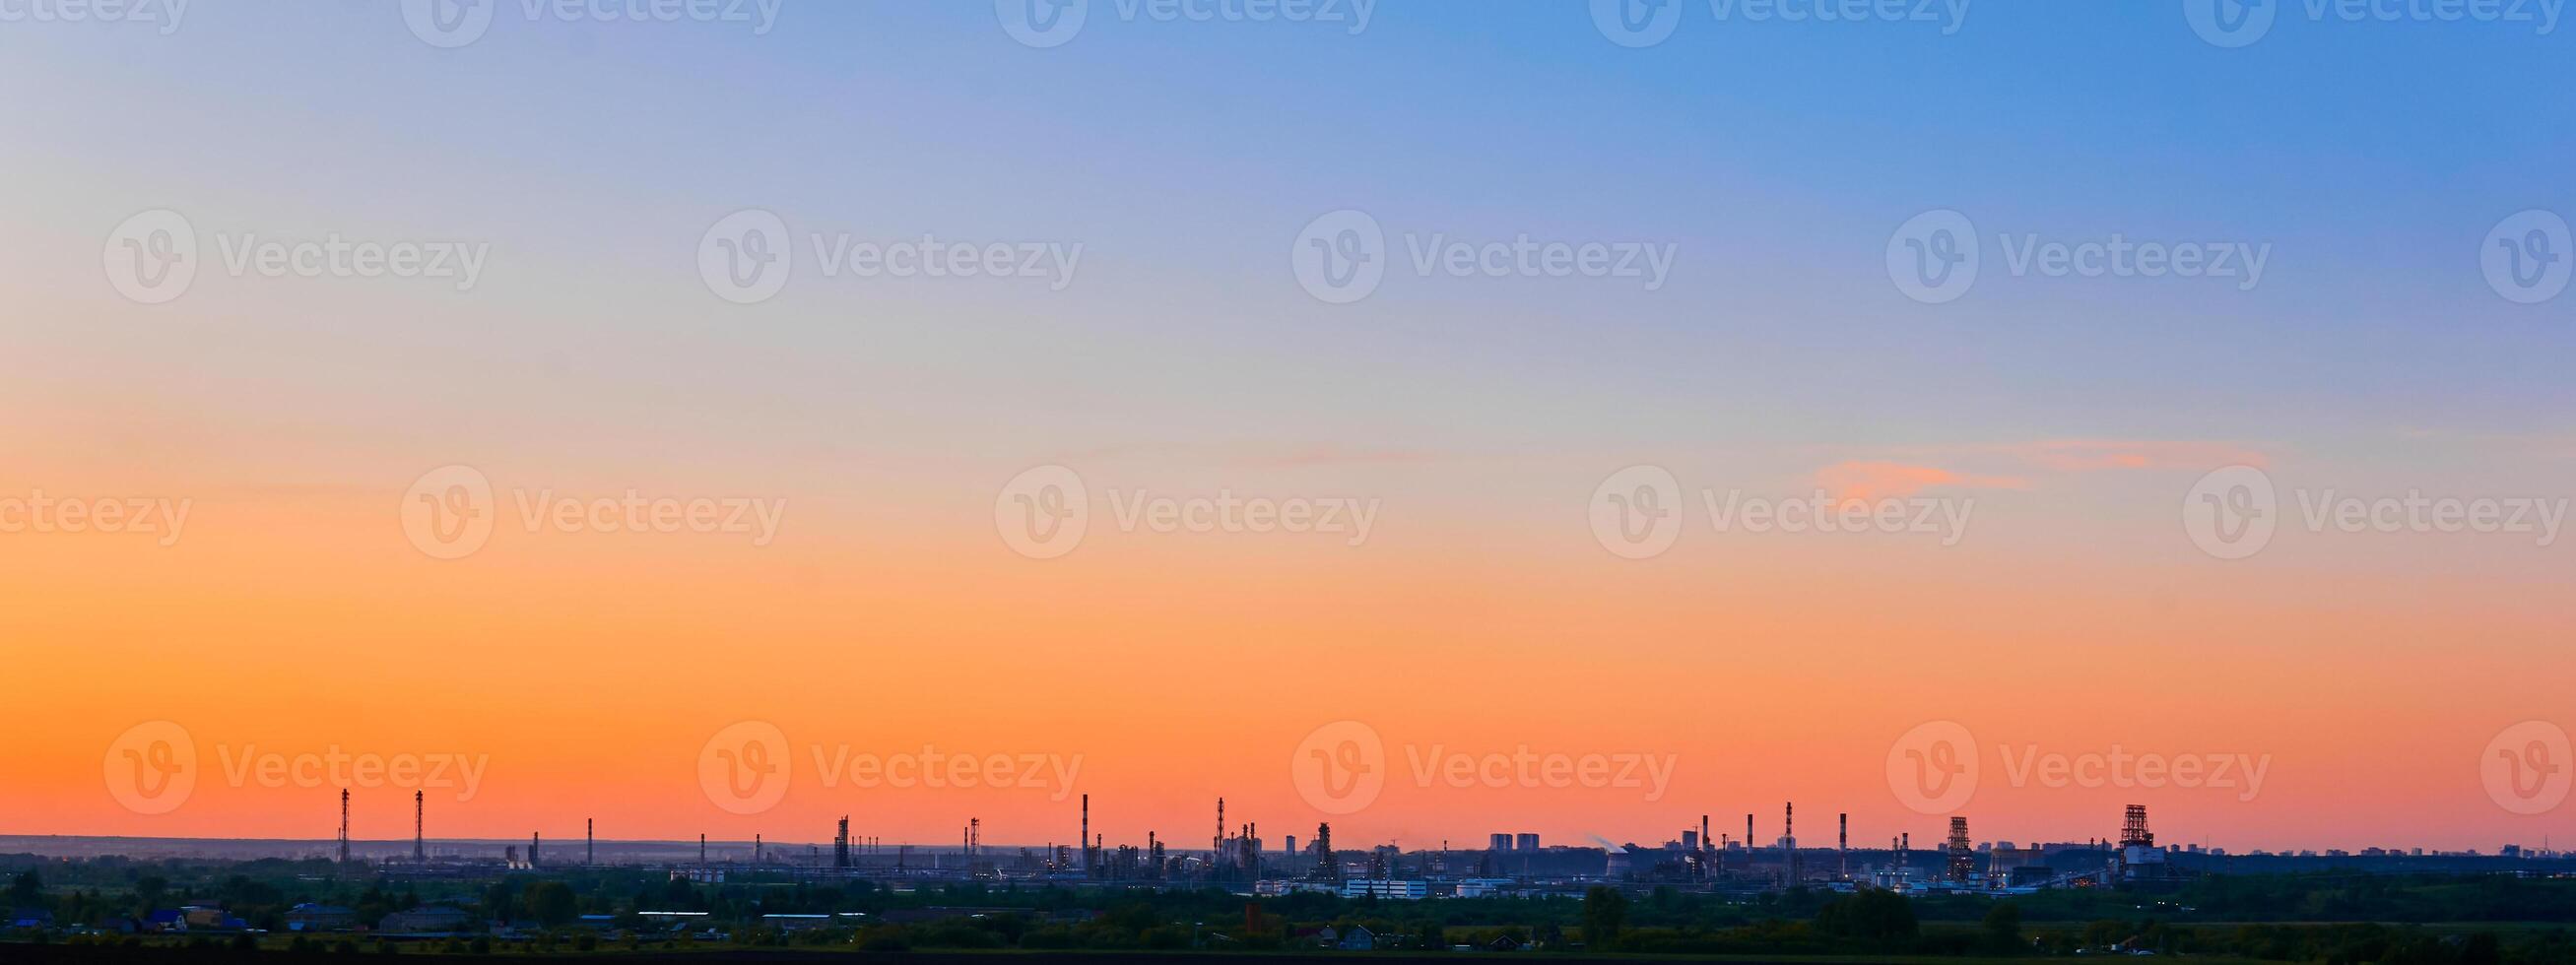 industrial silhouette landscape under the sunset sky photo